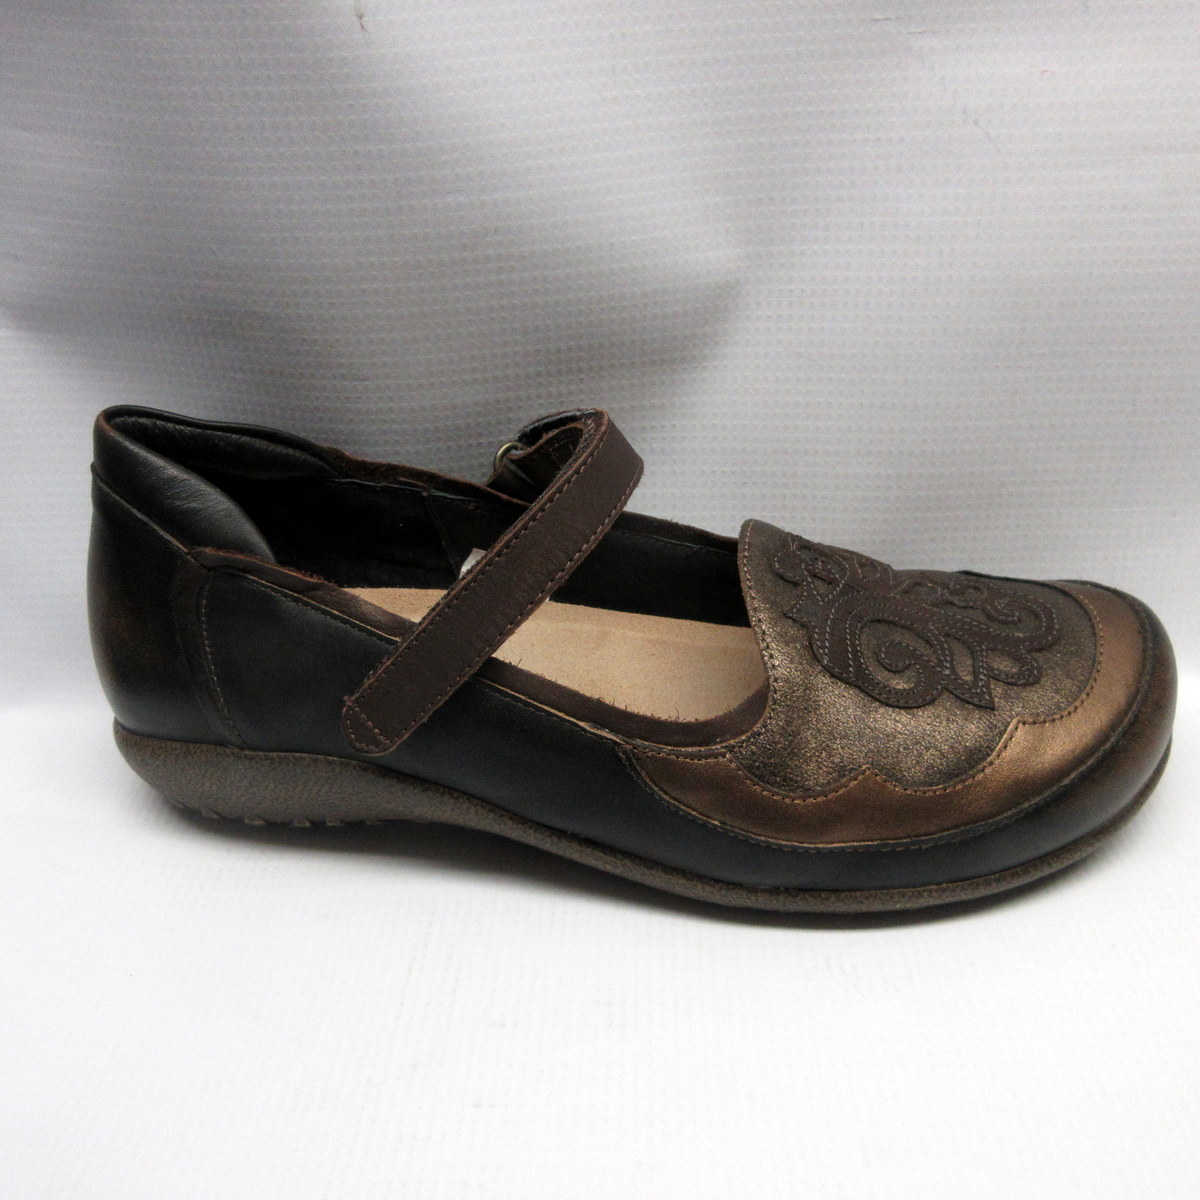 naot shoes for women